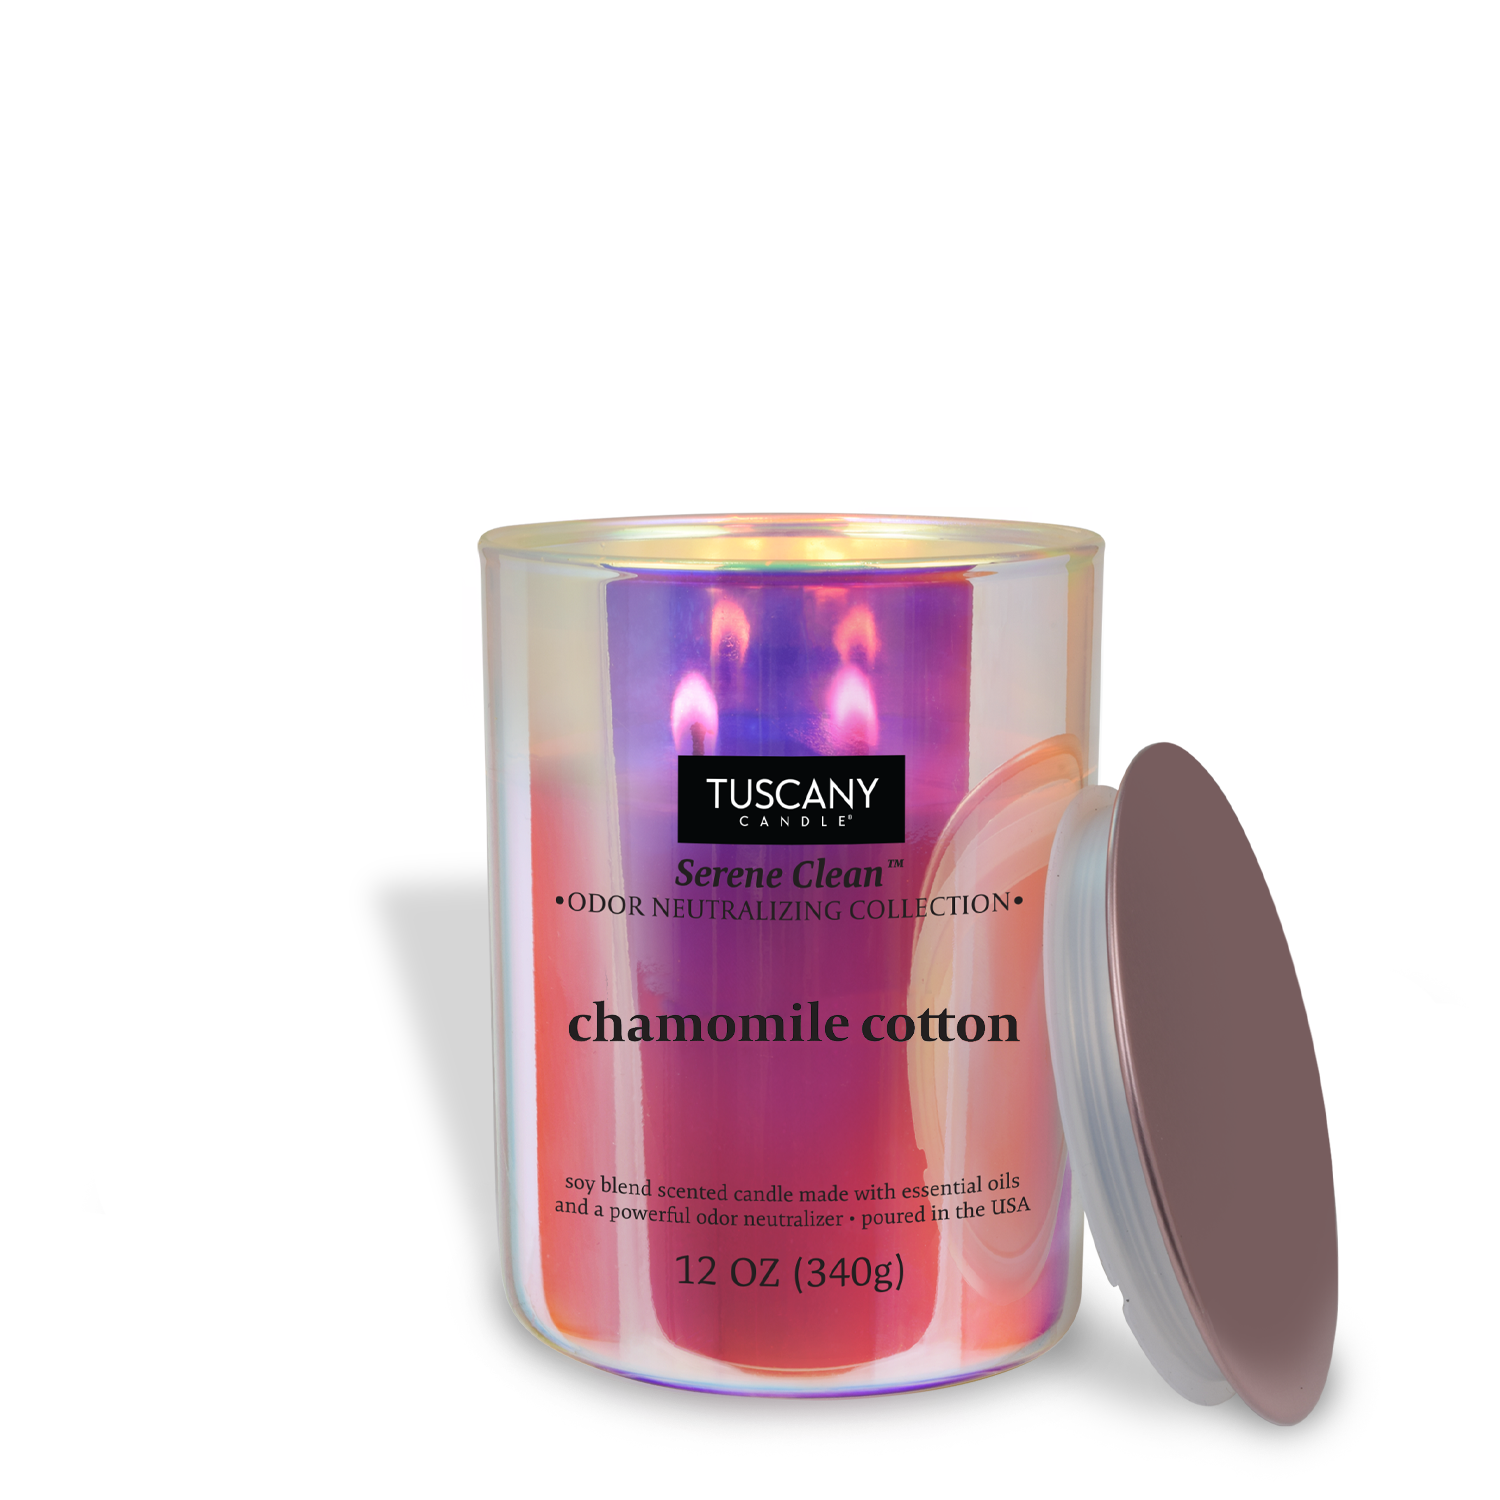 A lit view of Chamomile Cotton, an odor eliminating scented candle from Tuscany Candle's Serene Clean® collection of scented candles and wax melt bars